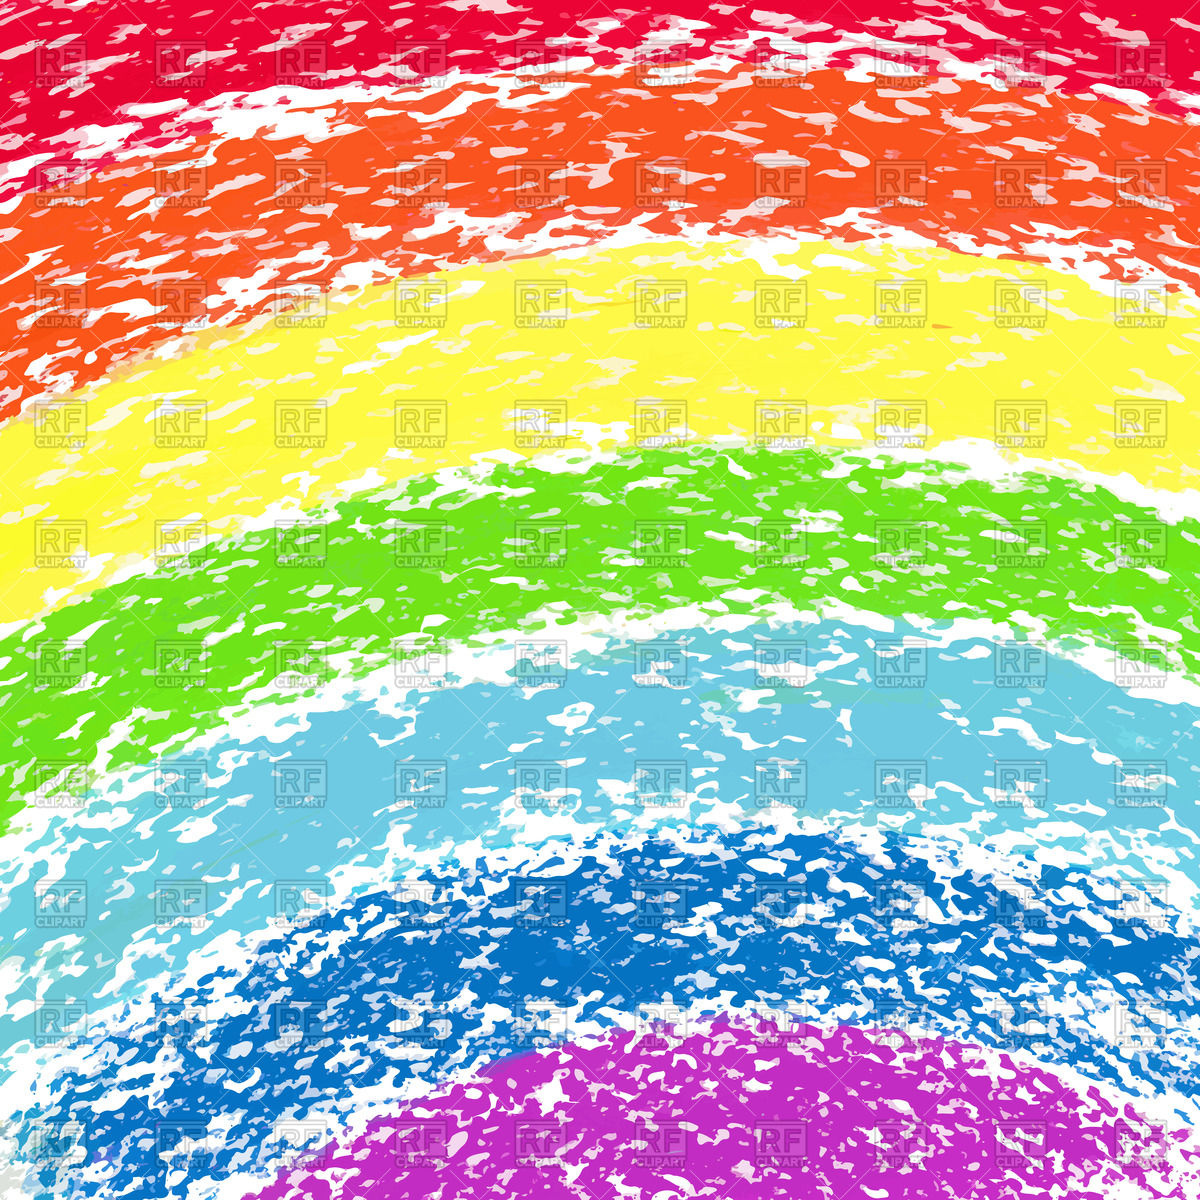 Rainbow painted by pastel crayons Vector Image #44513.